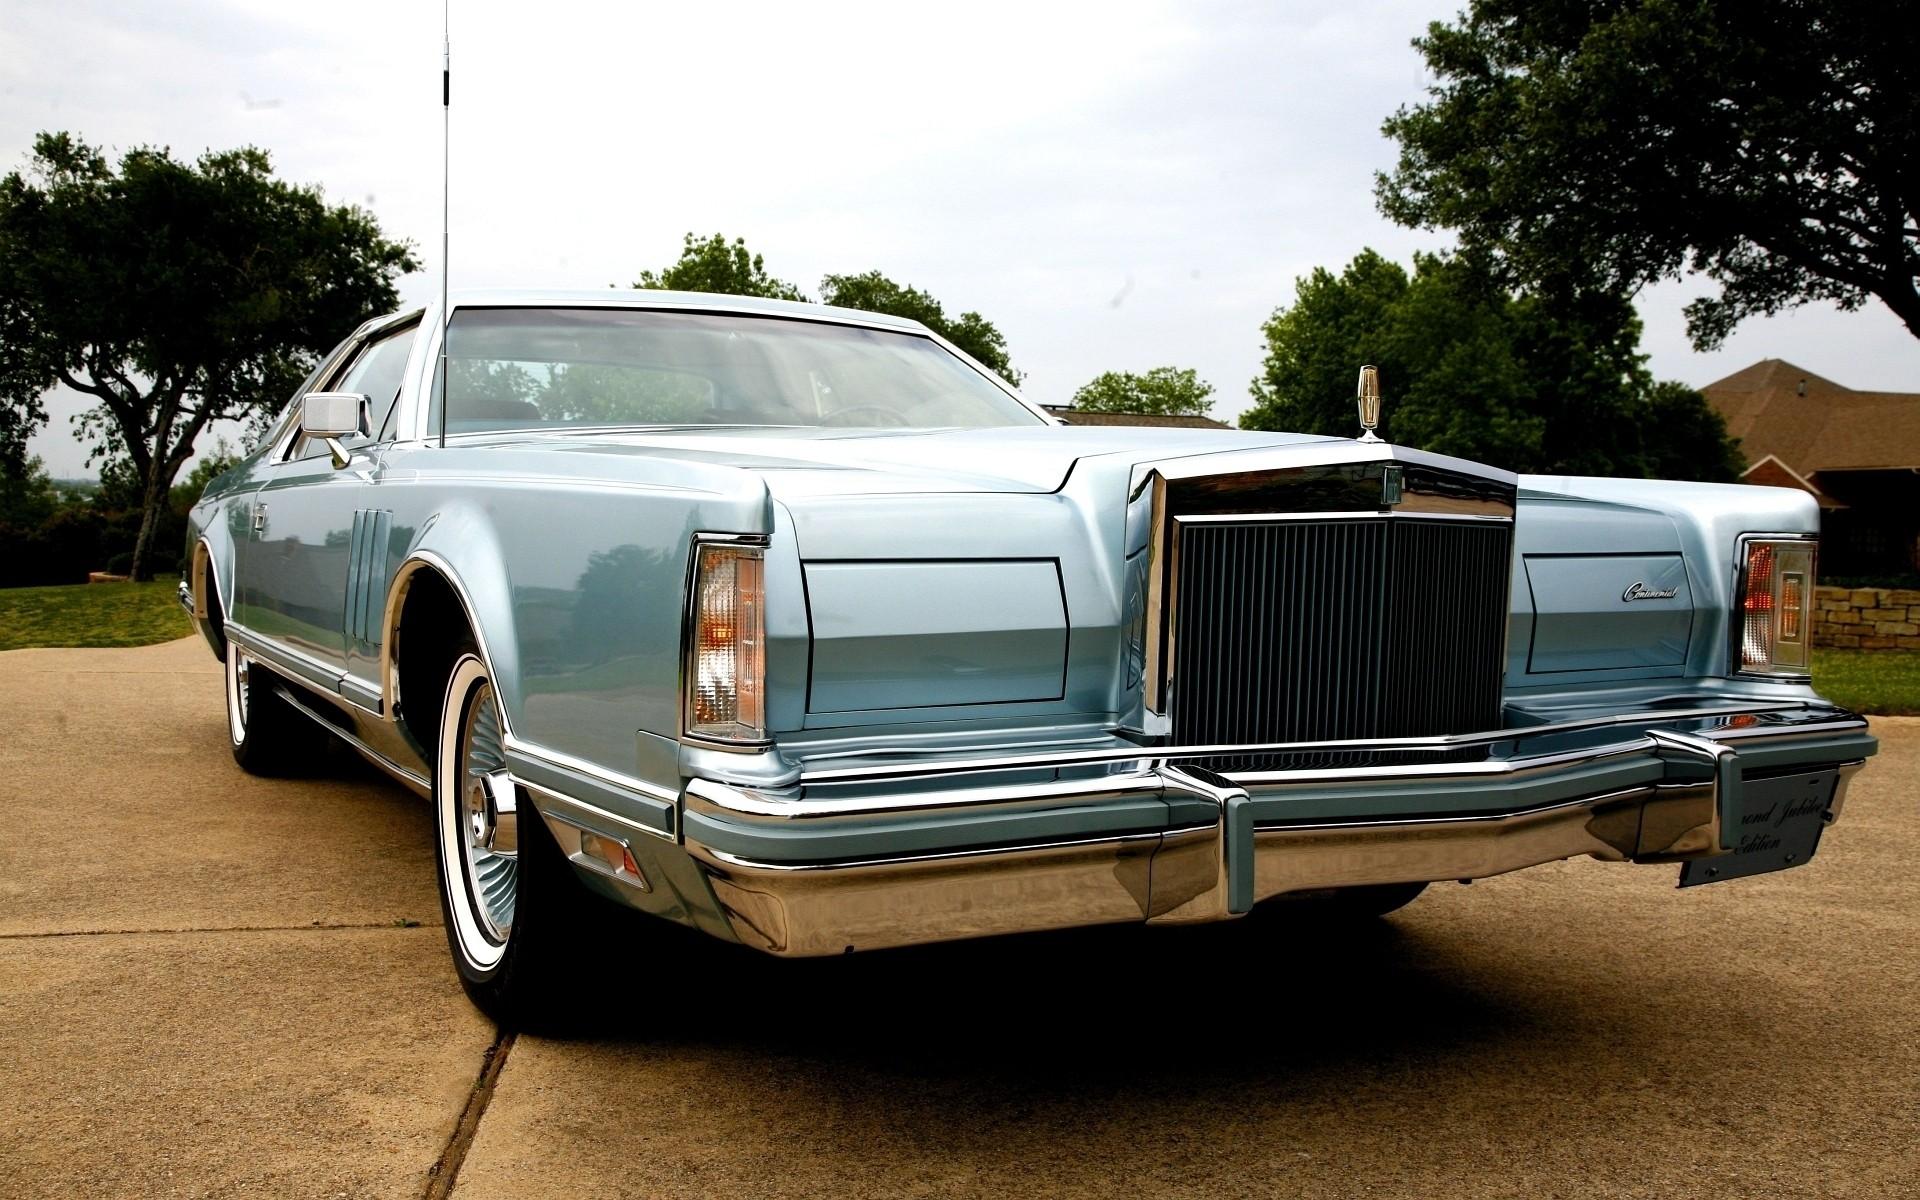 Vintage Lincoln Continental. Android wallpaper for free